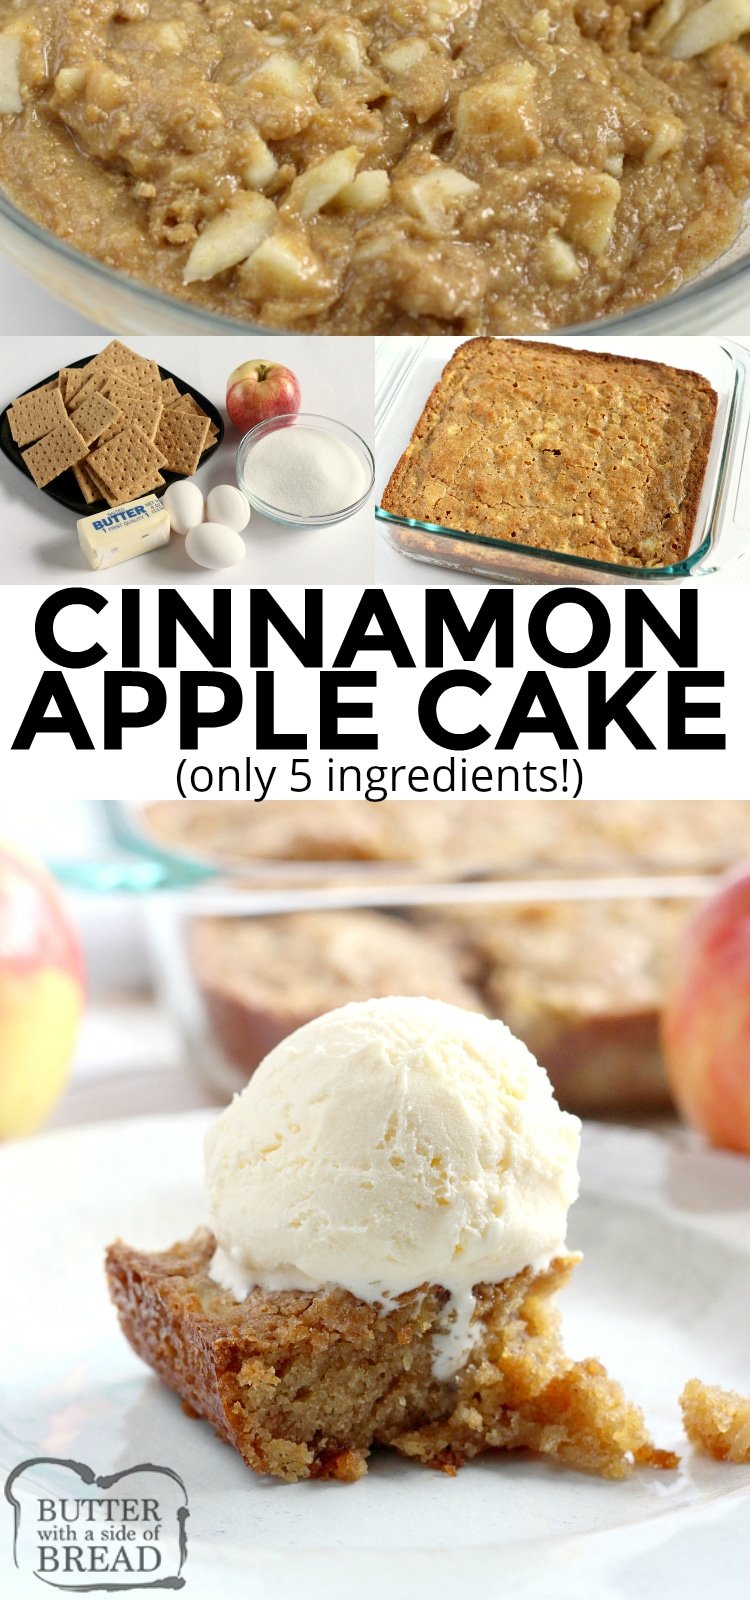 Easy Cinnamon Apple Cake is made with graham cracker crumbs, apples and just three other basic ingredients! This apple cake recipe is so moist and delicious that no one will believe how easy it is to make!